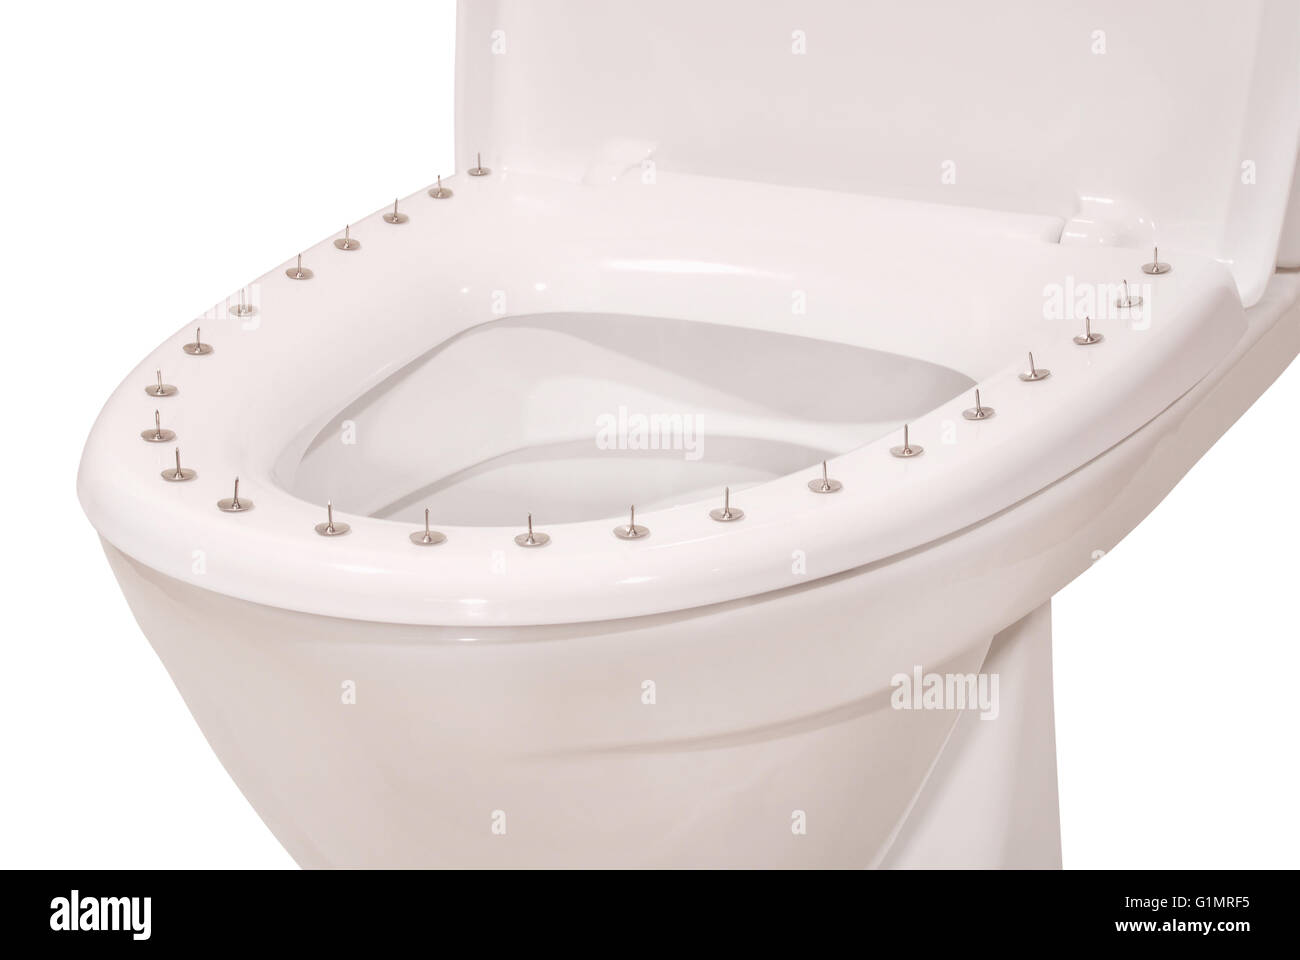 Thumbtacks on the lid of the toilet on white. Clipping path included. Stock Photo